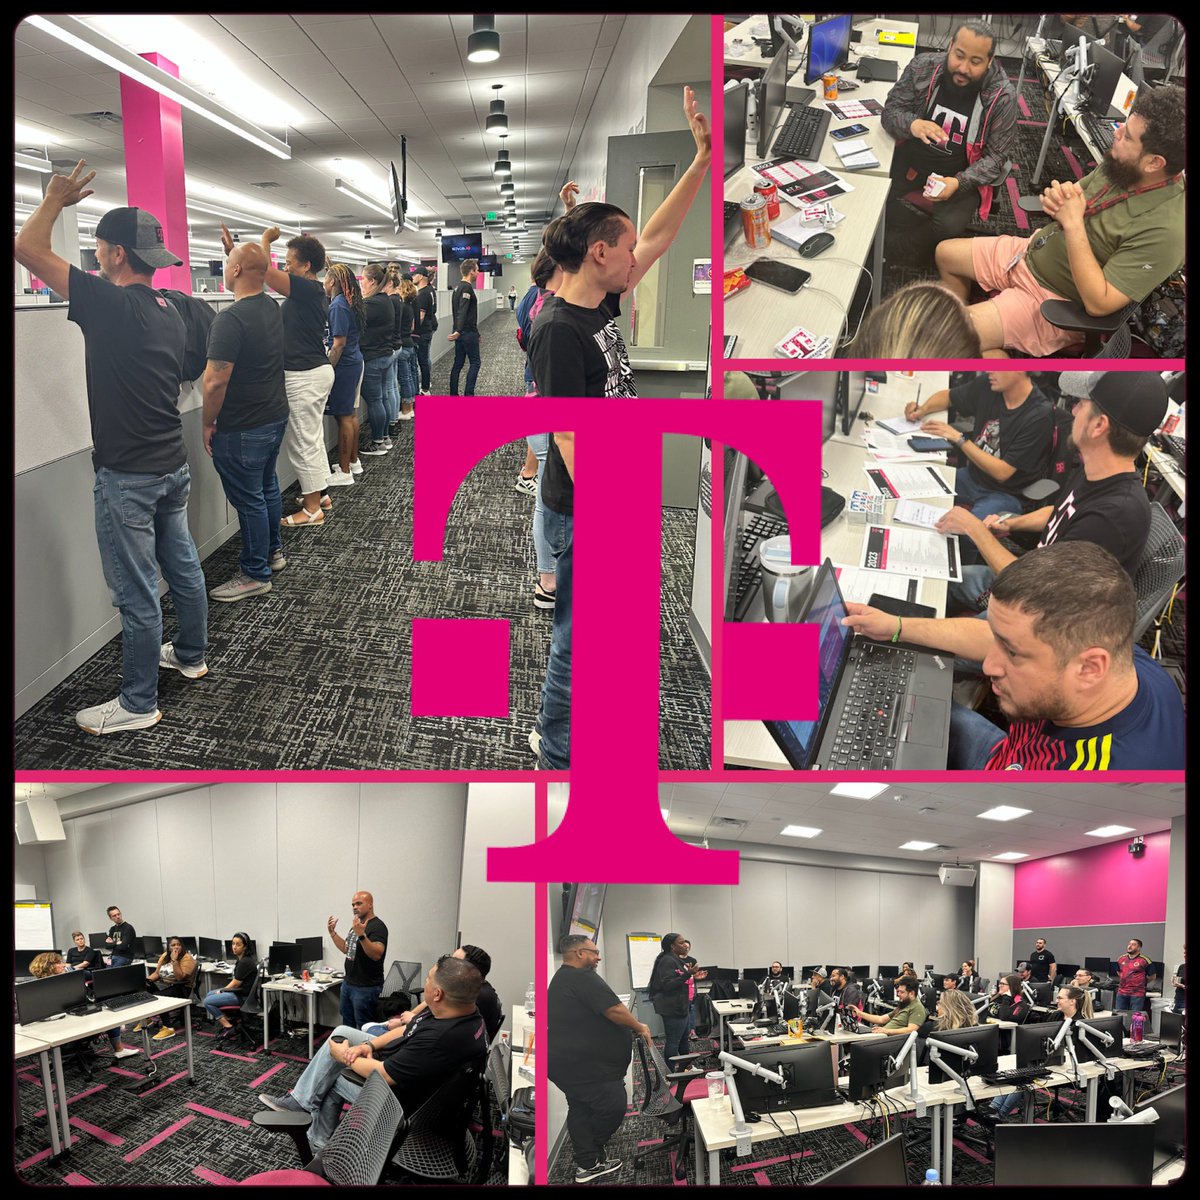 North & West Florida Chapters came together to Educate, Motivate, & Celebrate DE&I @TMobile! It was a great day for planning & networking within Florida. @ElviraDeCuir @SueStew92 @EddiePryor7 @JacksonTingley @ChartierDoug @JonFreier @cannlee17 @HolliMartinez1 @JohnStevens_